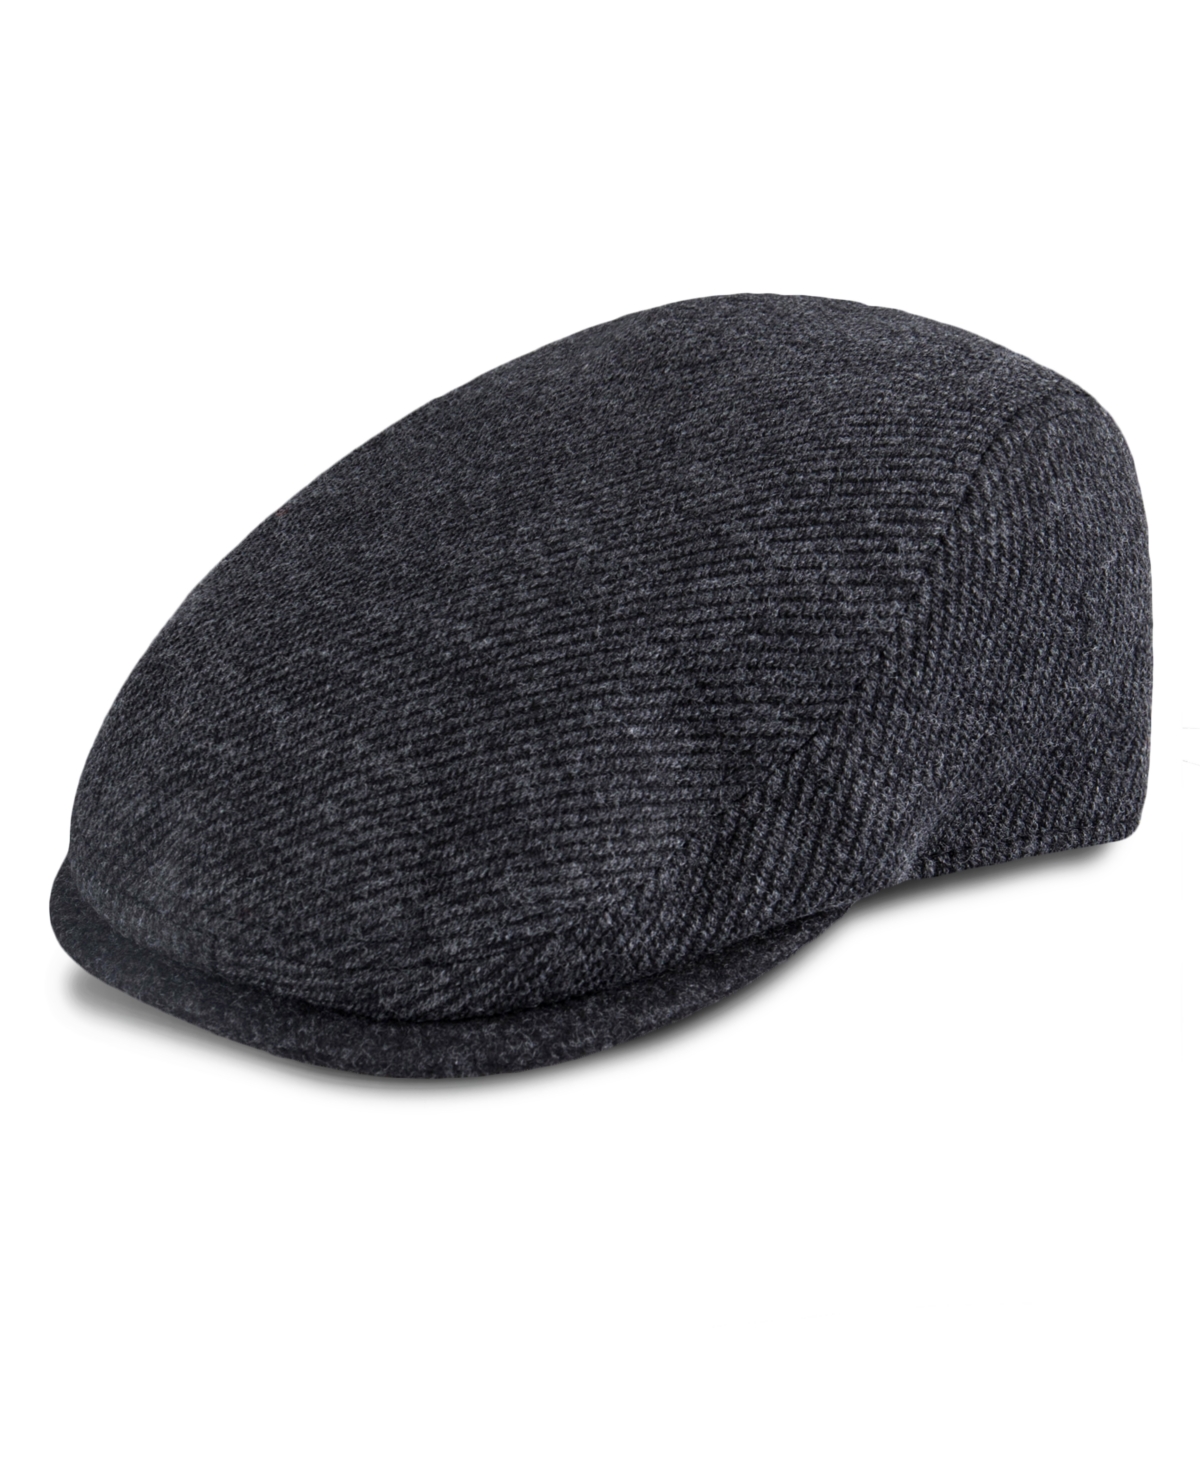 Levi's Men's Oversized Twill Flat Top Ivy Cap In Charcoal